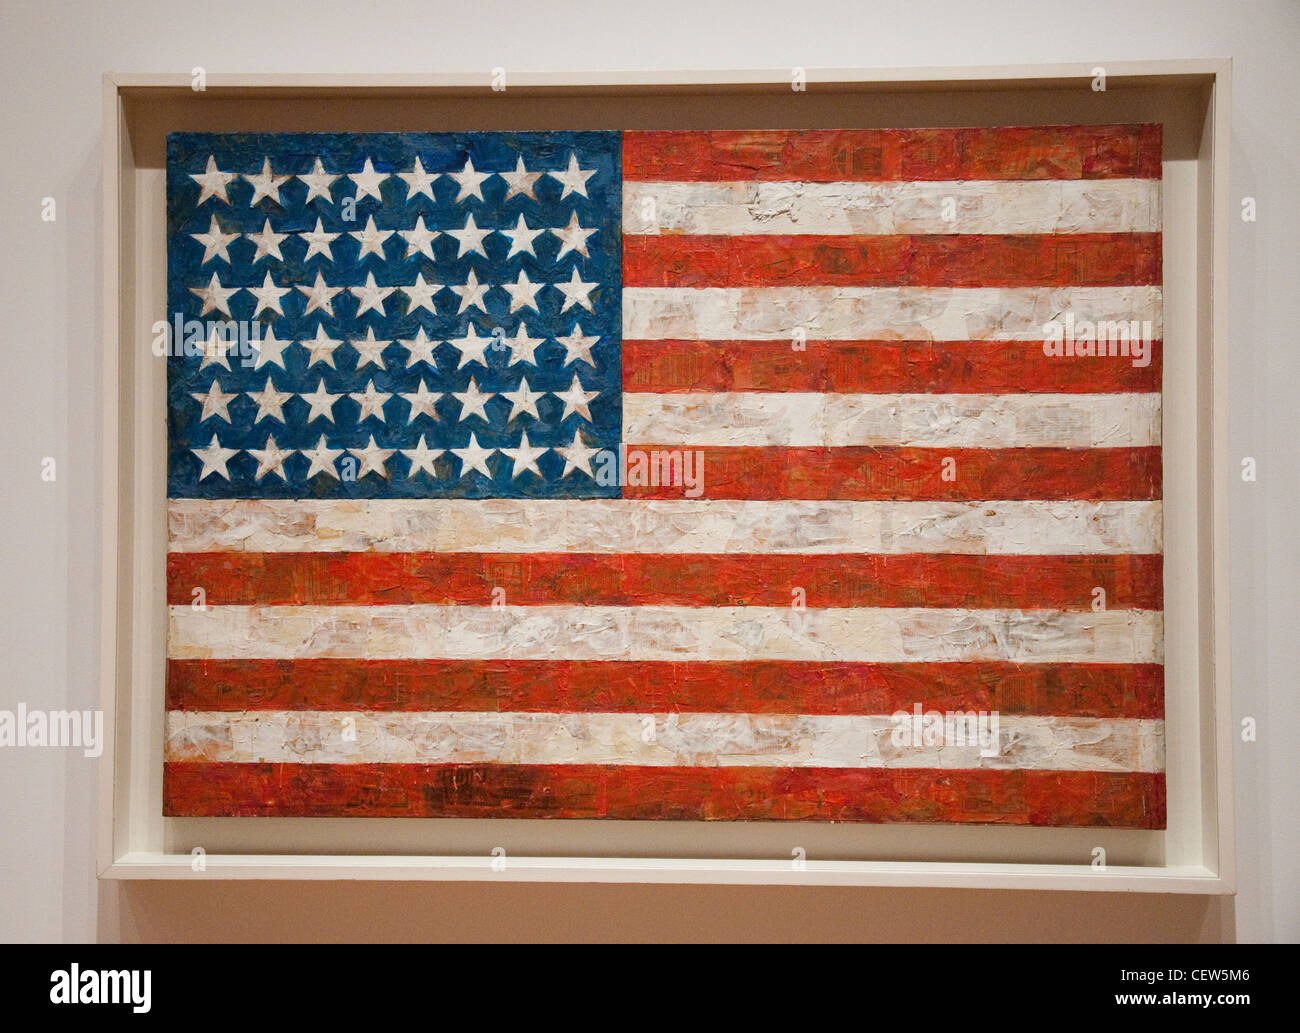 Flag by Jasper Johns at the Museum of Modern Art (MOMA) in New York City, USA Stock Photo